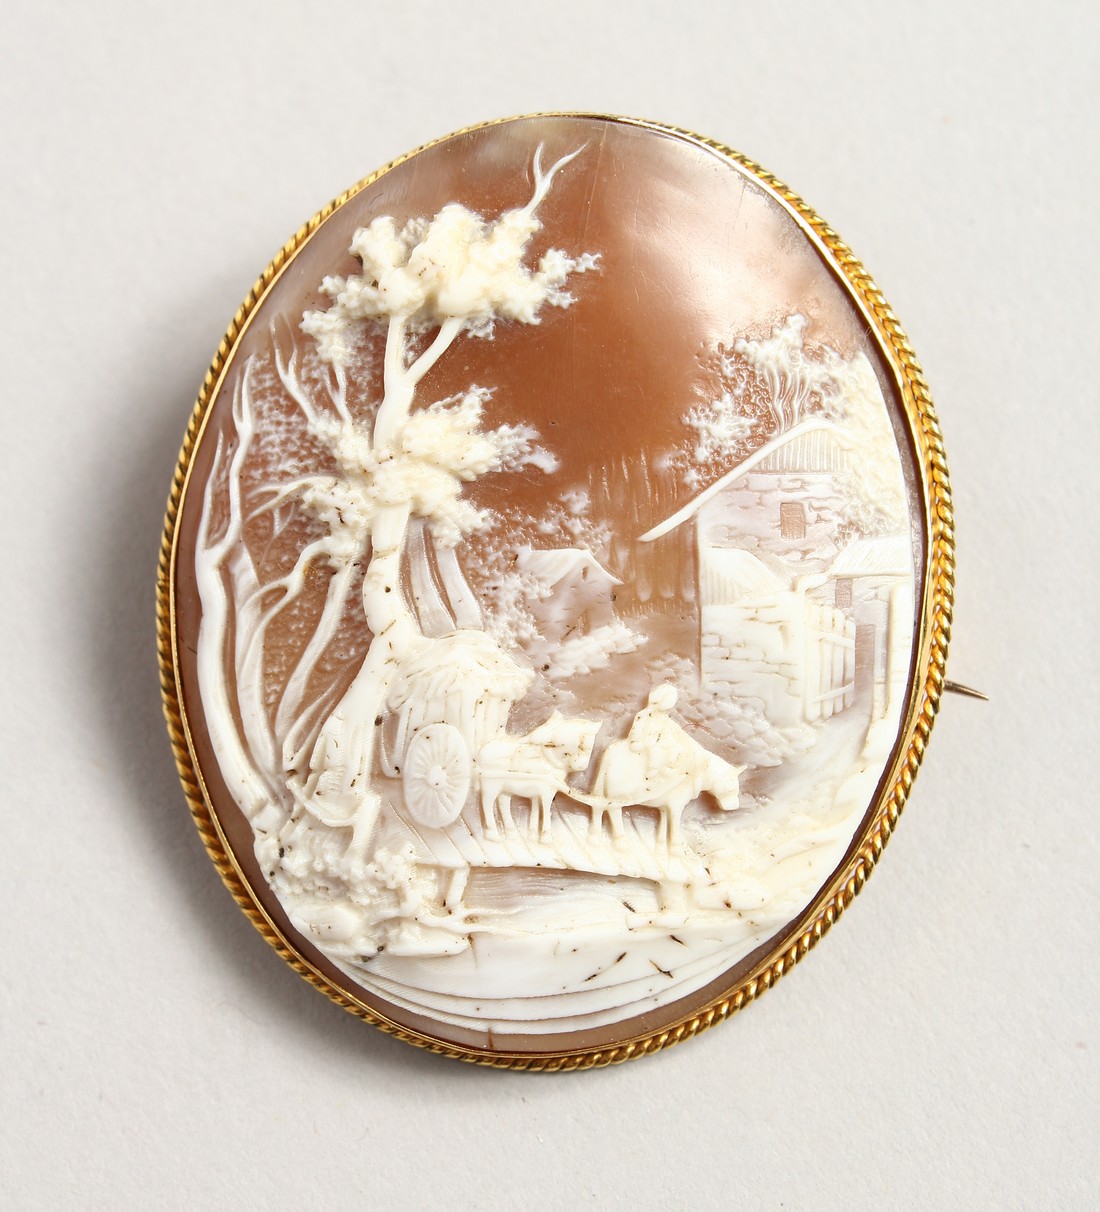 A LARGE 18CT GOLD OVAL CAMEO BROOCH, landscape, horse drawn cart.